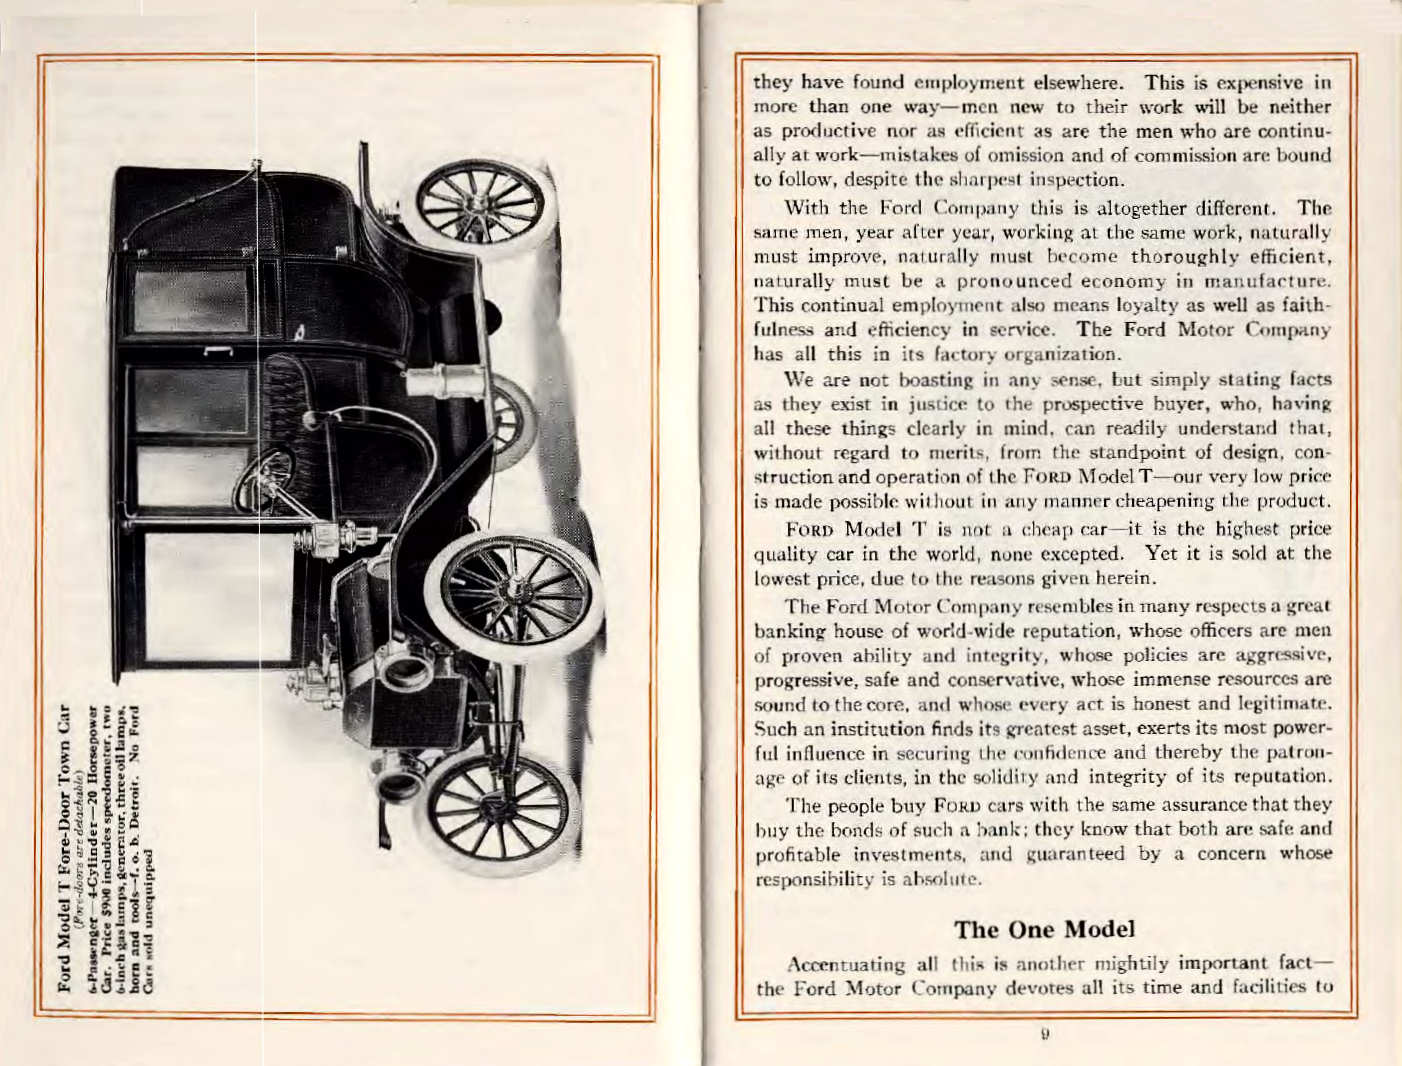 1912_Ford_Motor_Cars-08-09